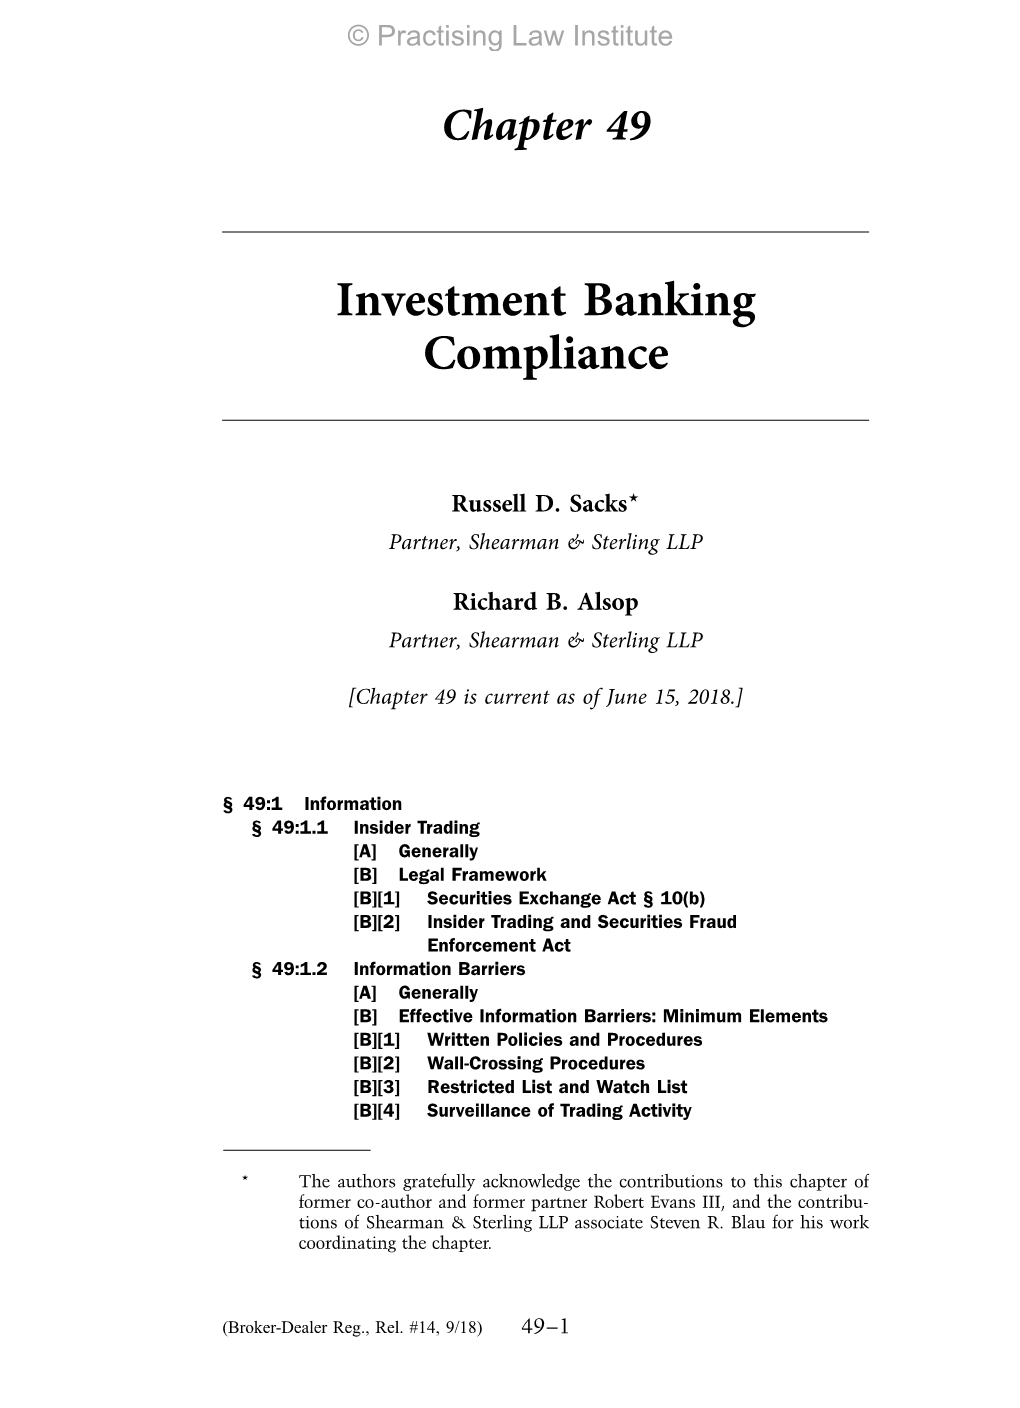 Investment Banking Compliance